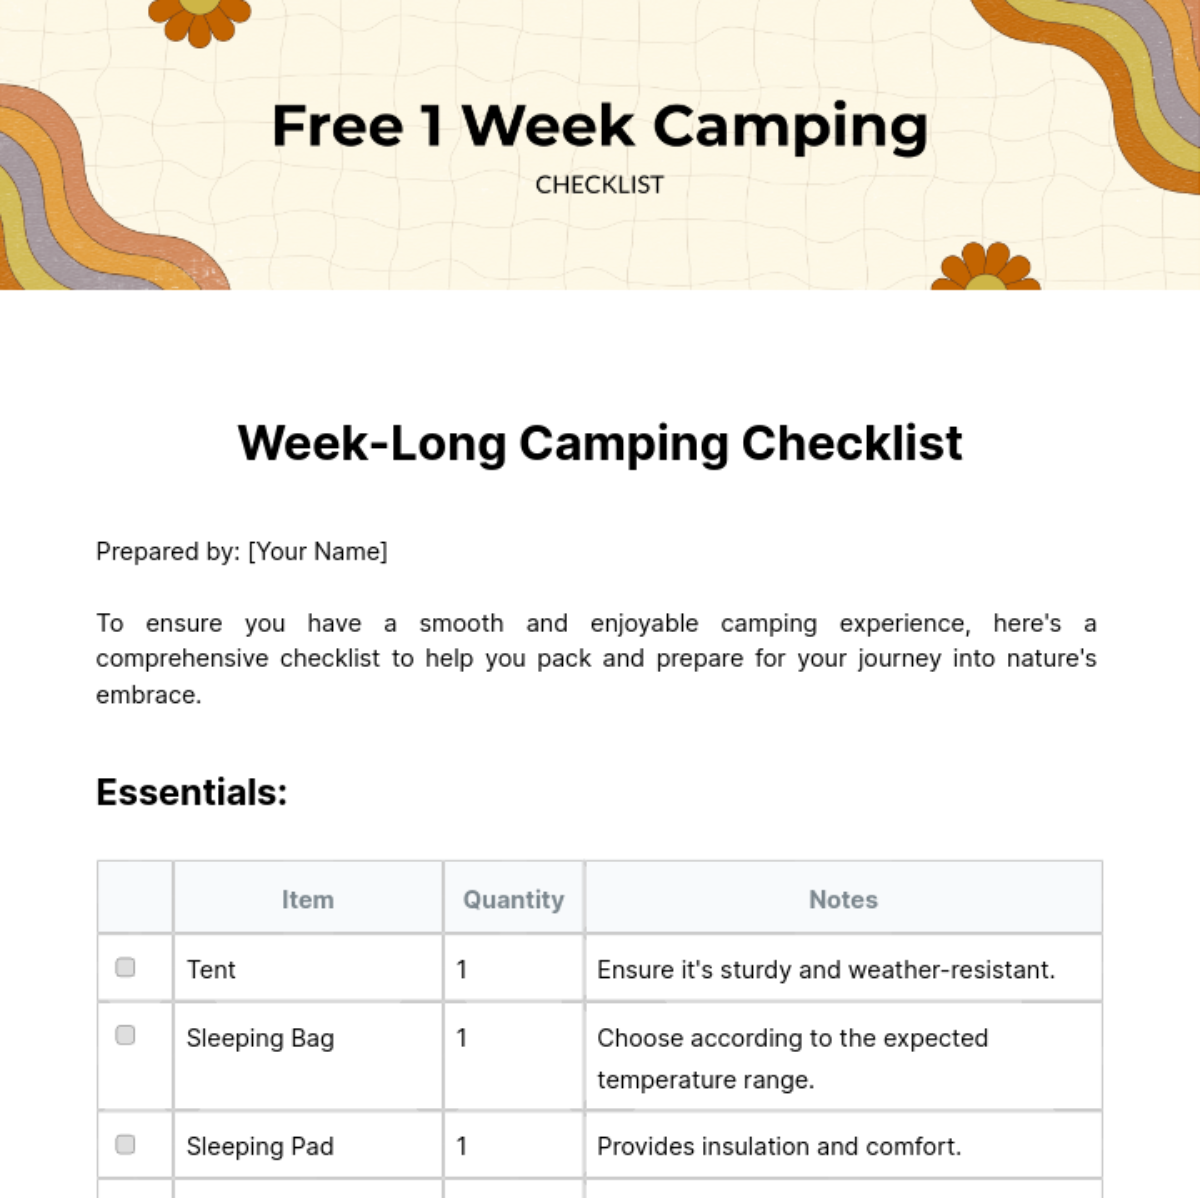 Free 1 Week Camping Checklist Template